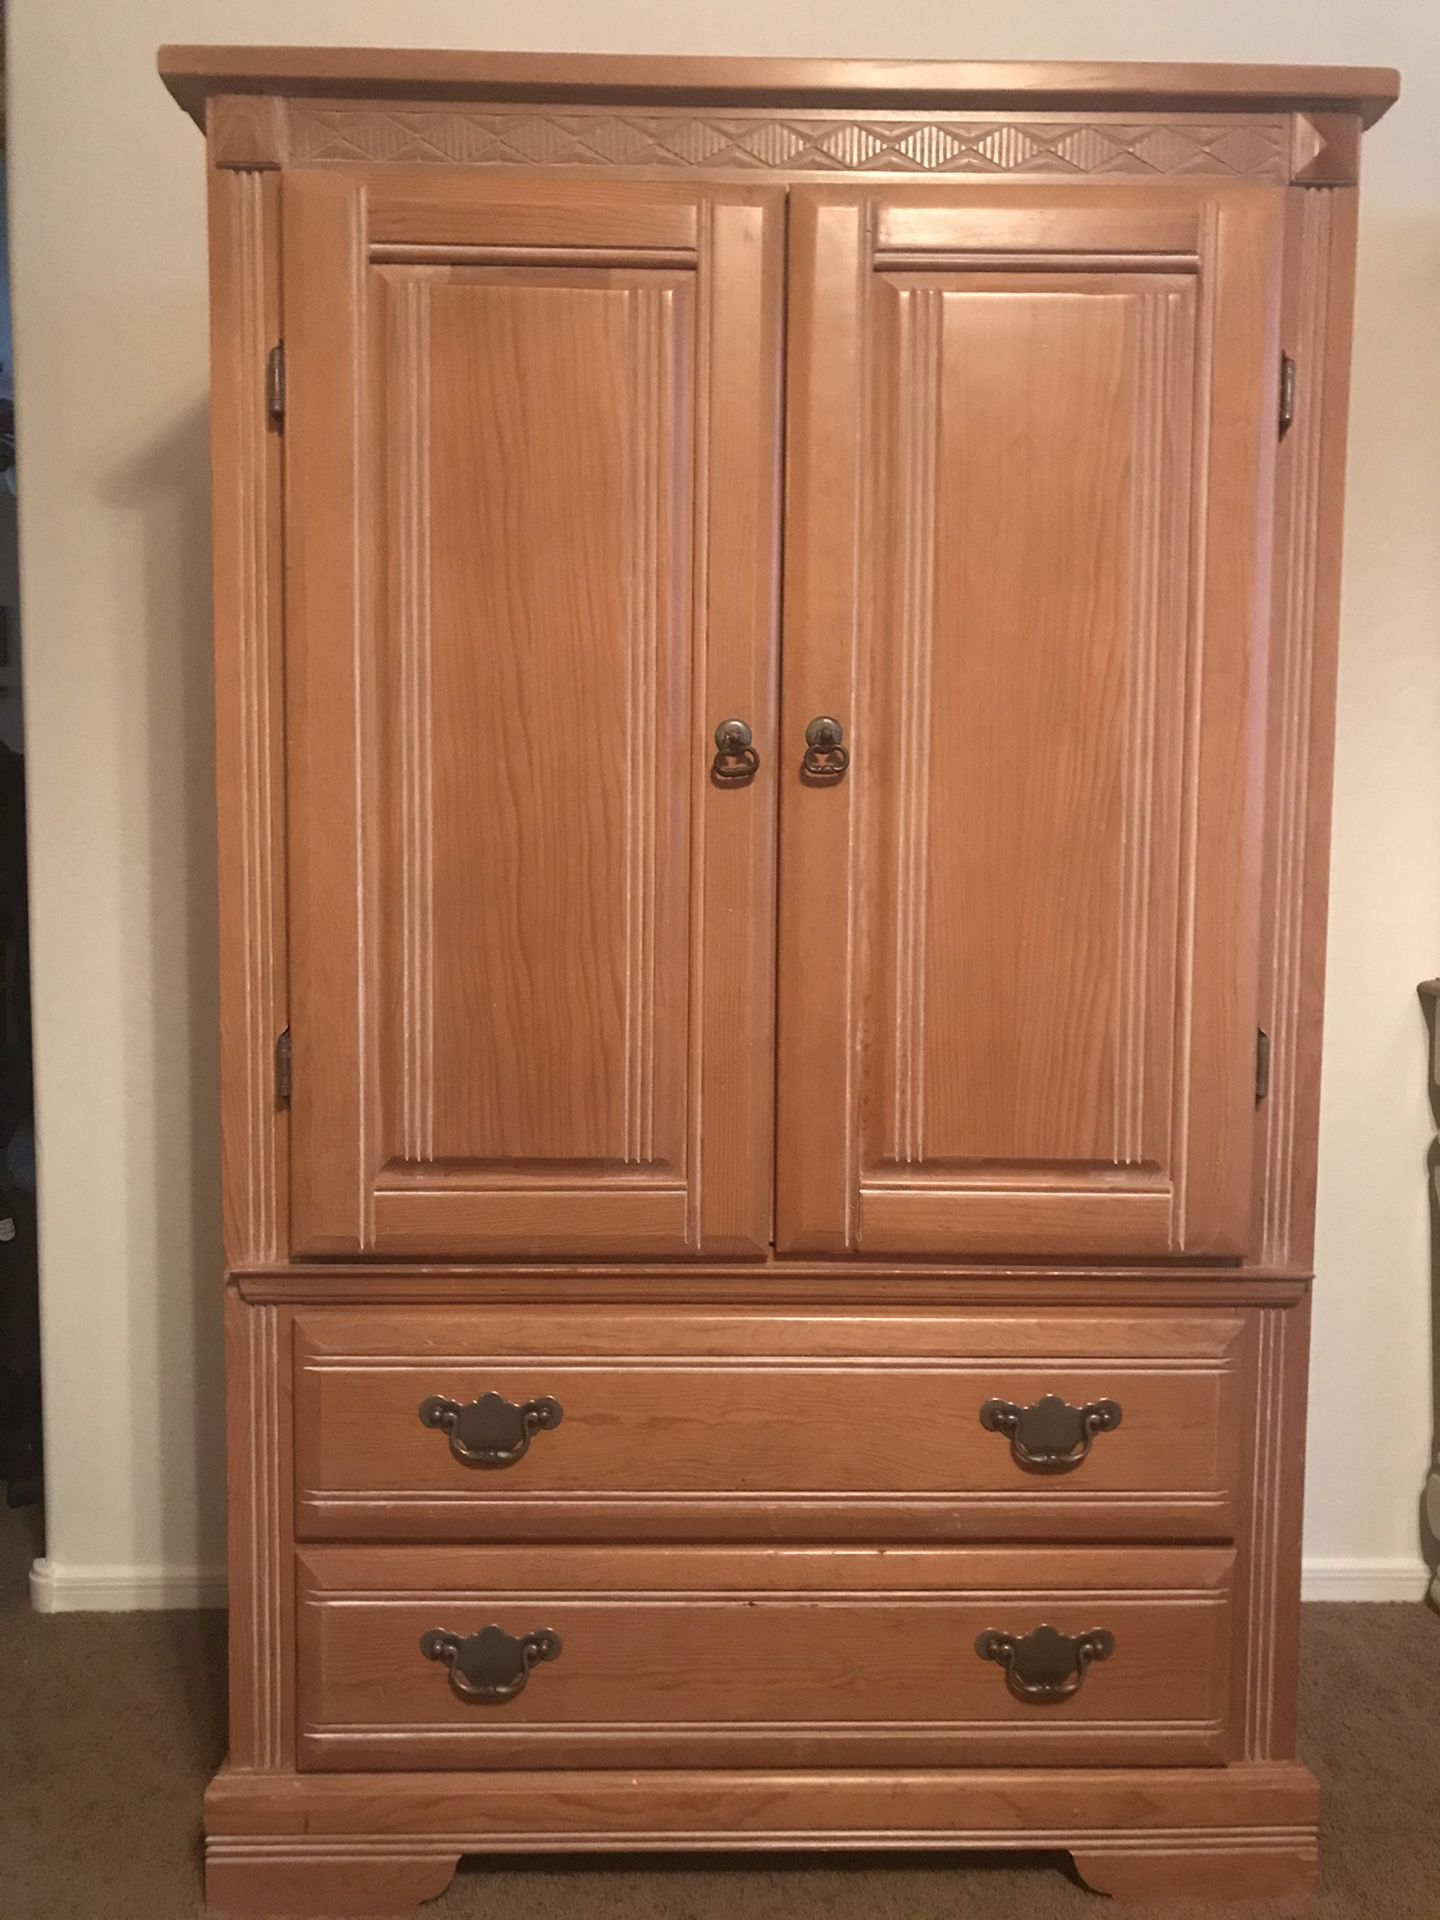 Armoire and dresser chest. $40 each.